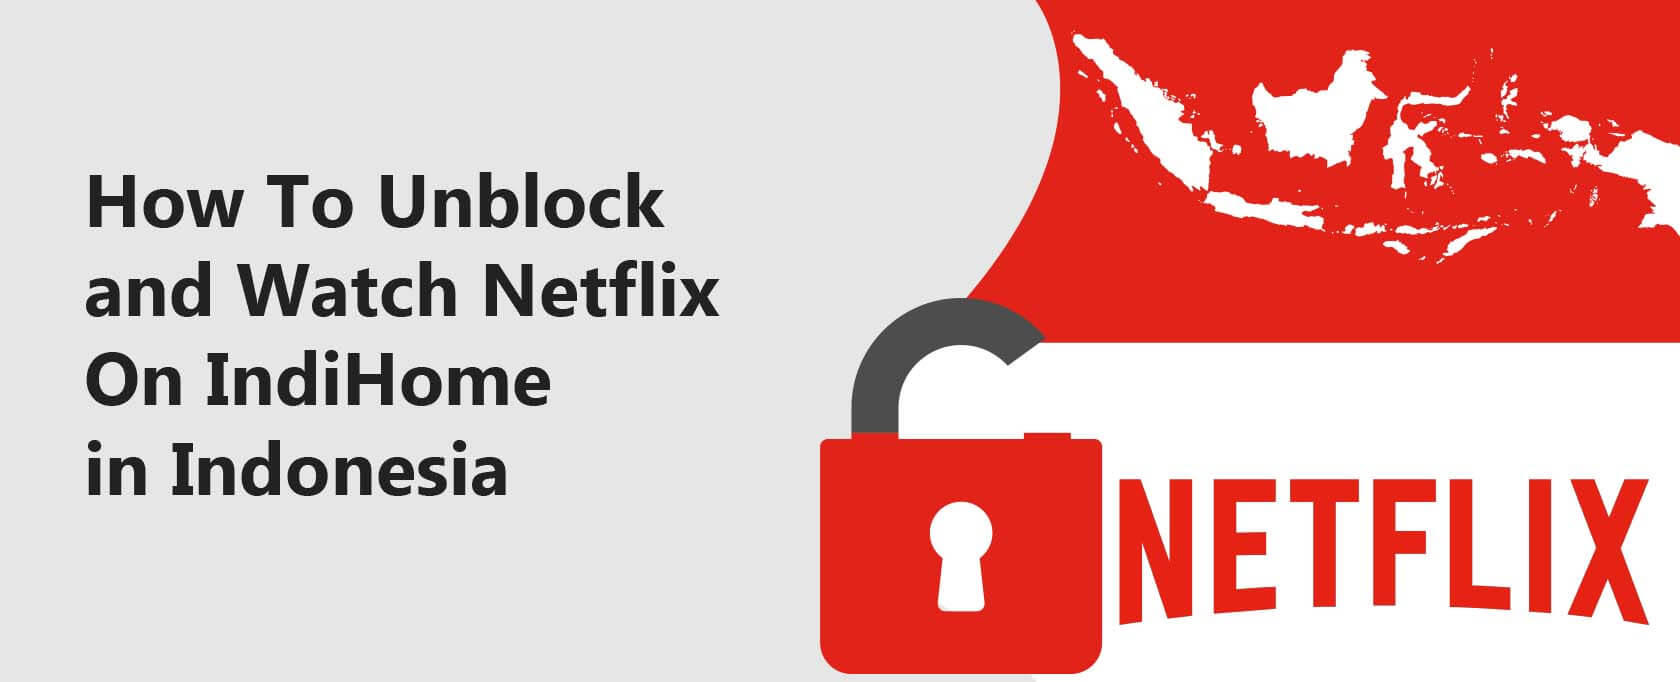 How to Unblock Netflix on the IndiHome Network